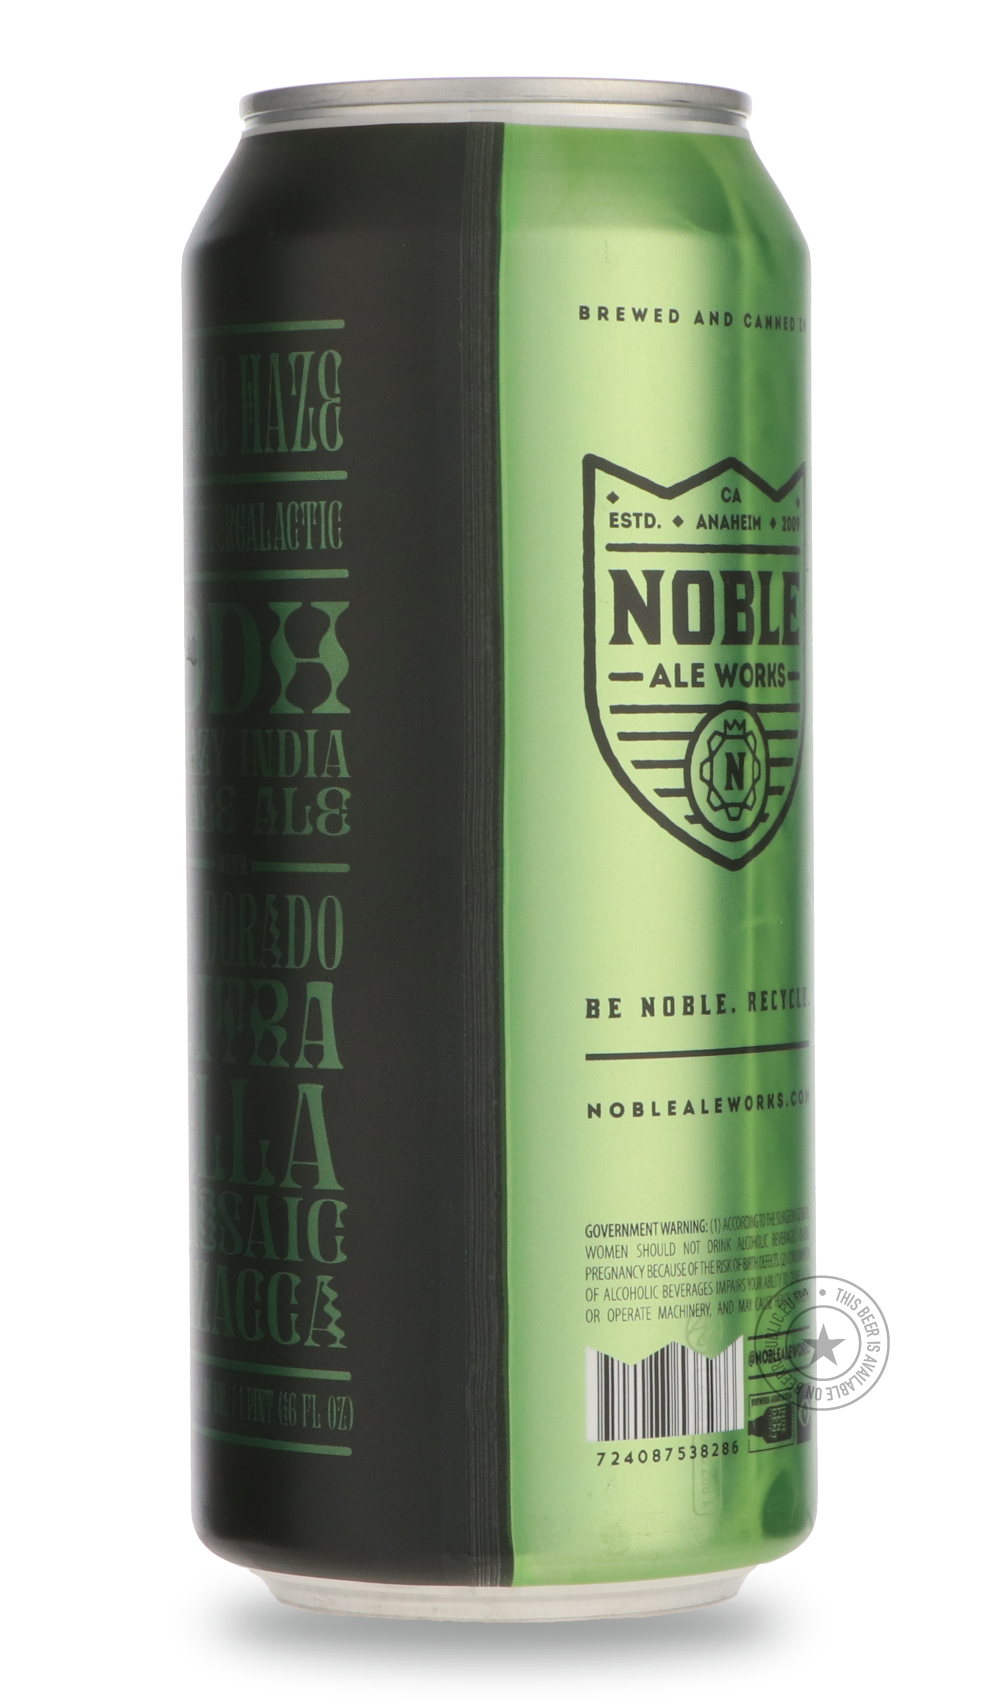 -Noble- Felt Intergalactic-IPA- Only @ Beer Republic - The best online beer store for American & Canadian craft beer - Buy beer online from the USA and Canada - Bier online kopen - Amerikaans bier kopen - Craft beer store - Craft beer kopen - Amerikanisch bier kaufen - Bier online kaufen - Acheter biere online - IPA - Stout - Porter - New England IPA - Hazy IPA - Imperial Stout - Barrel Aged - Barrel Aged Imperial Stout - Brown - Dark beer - Blond - Blonde - Pilsner - Lager - Wheat - Weizen - Amber - Barley